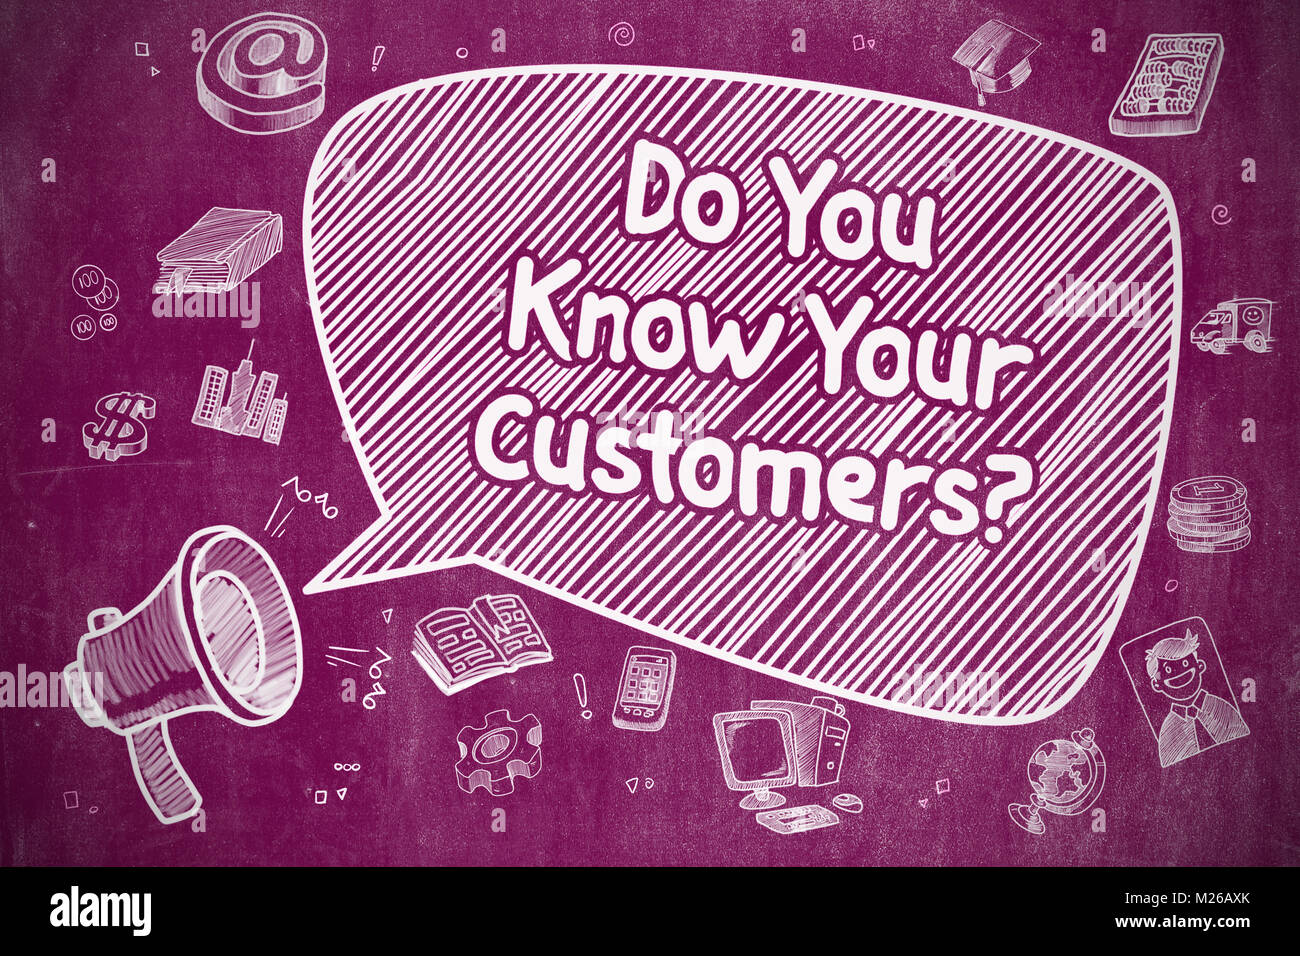 Do You Know Your Customers - Business Concept. Stock Photo